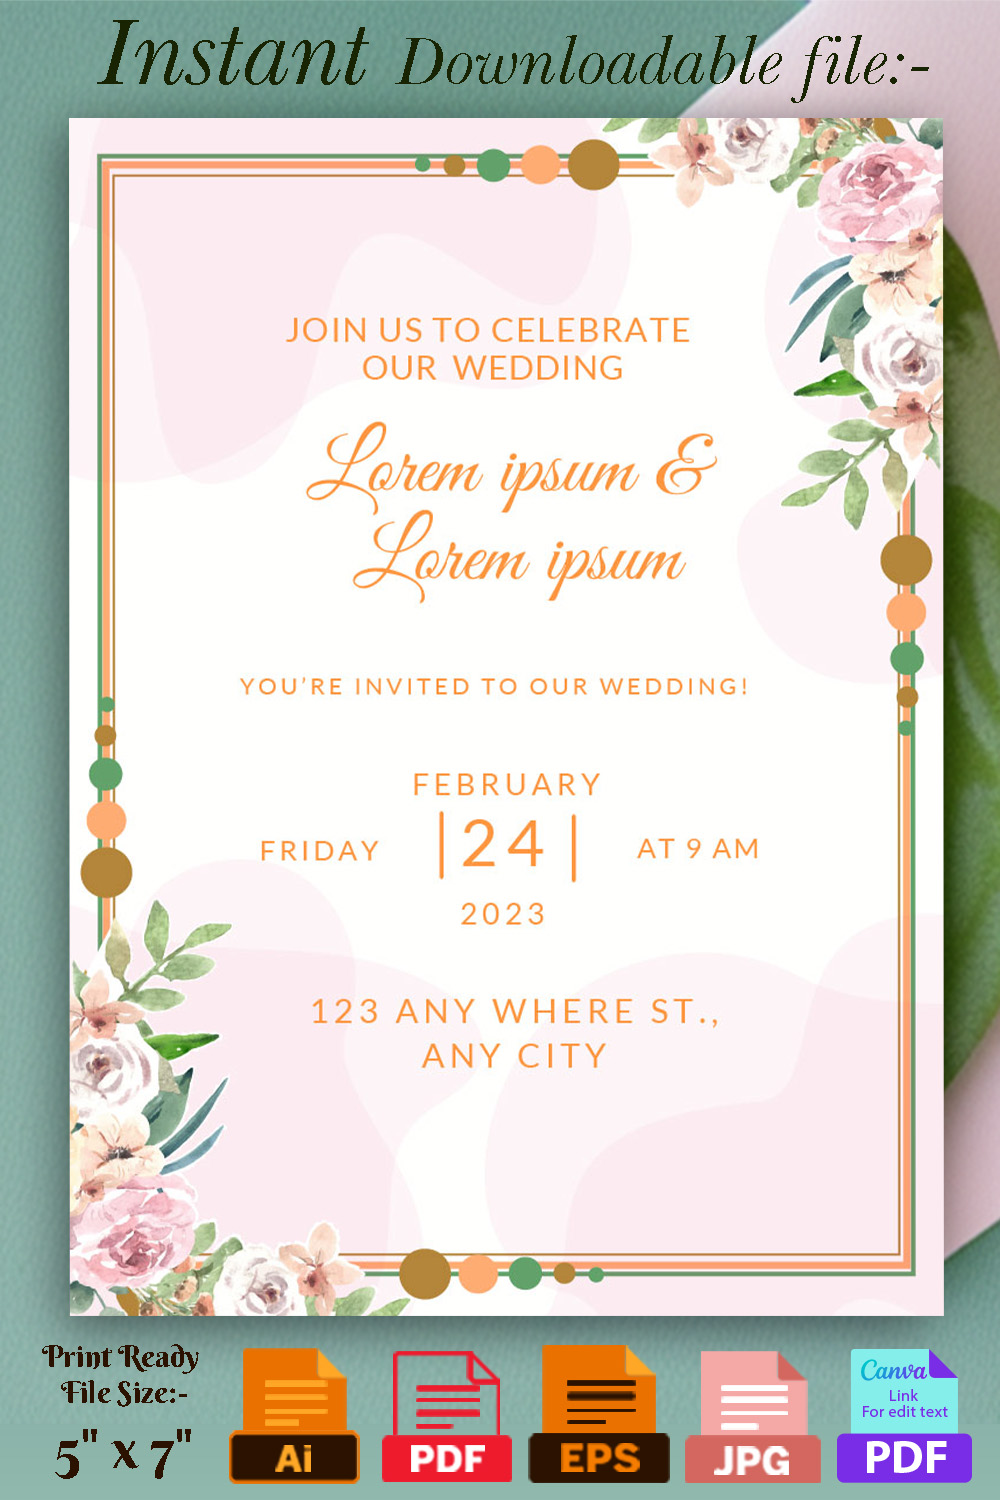 Image with charming wedding invitation with floral decor.